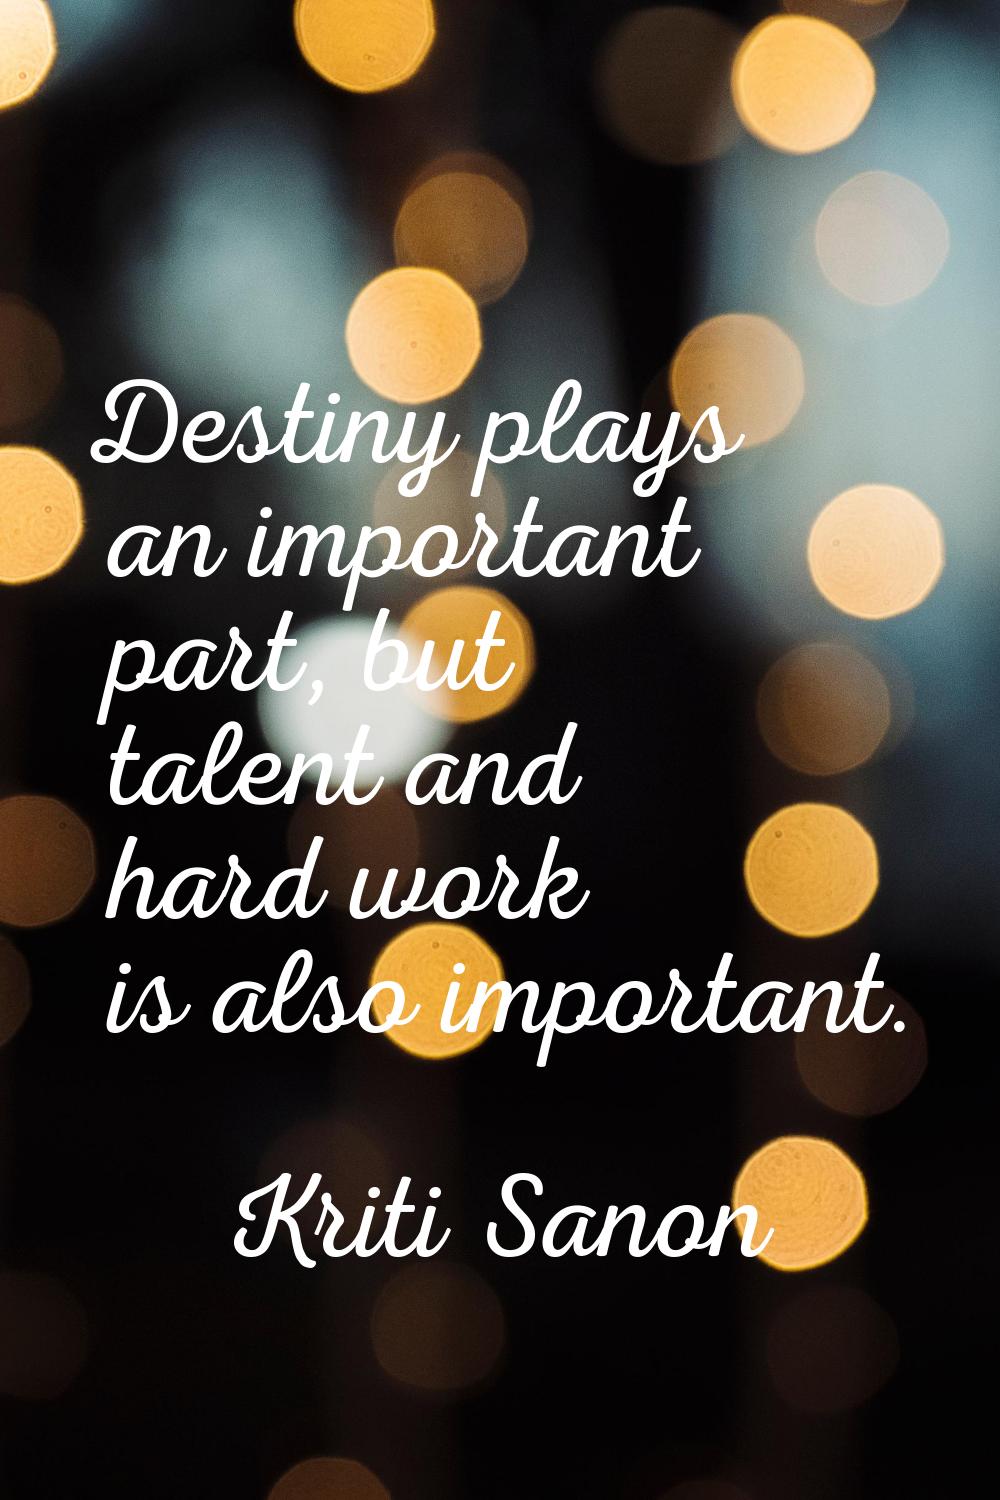 Destiny plays an important part, but talent and hard work is also important.